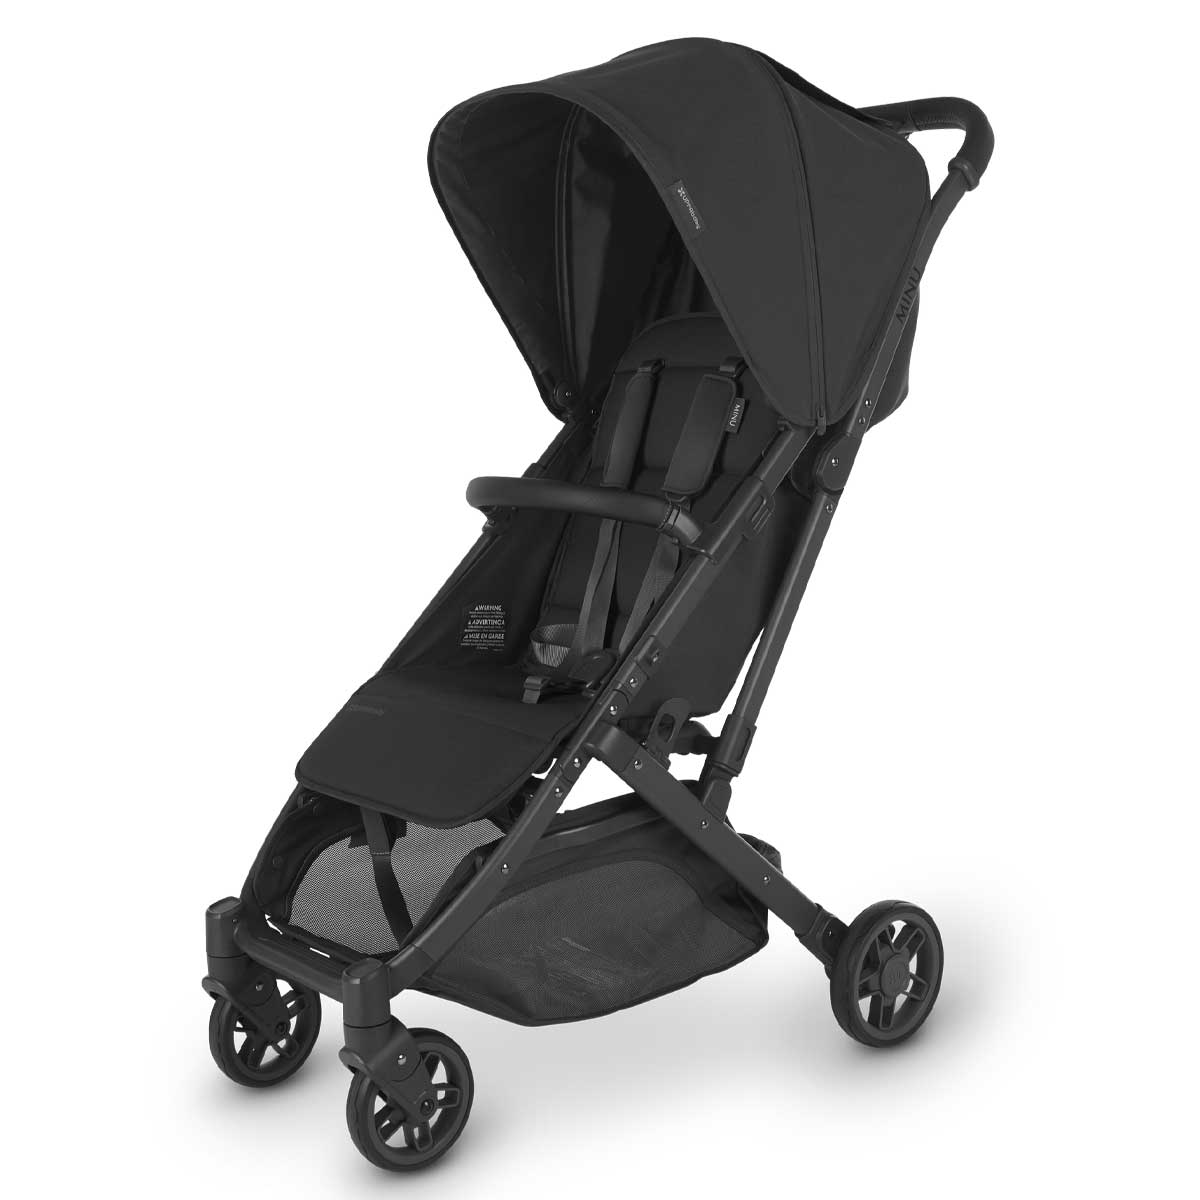 UPPAbaby compact stroller UPPAbaby MINU V2 Stroller - Jake (Charcoal/Carbon/Black Leather)